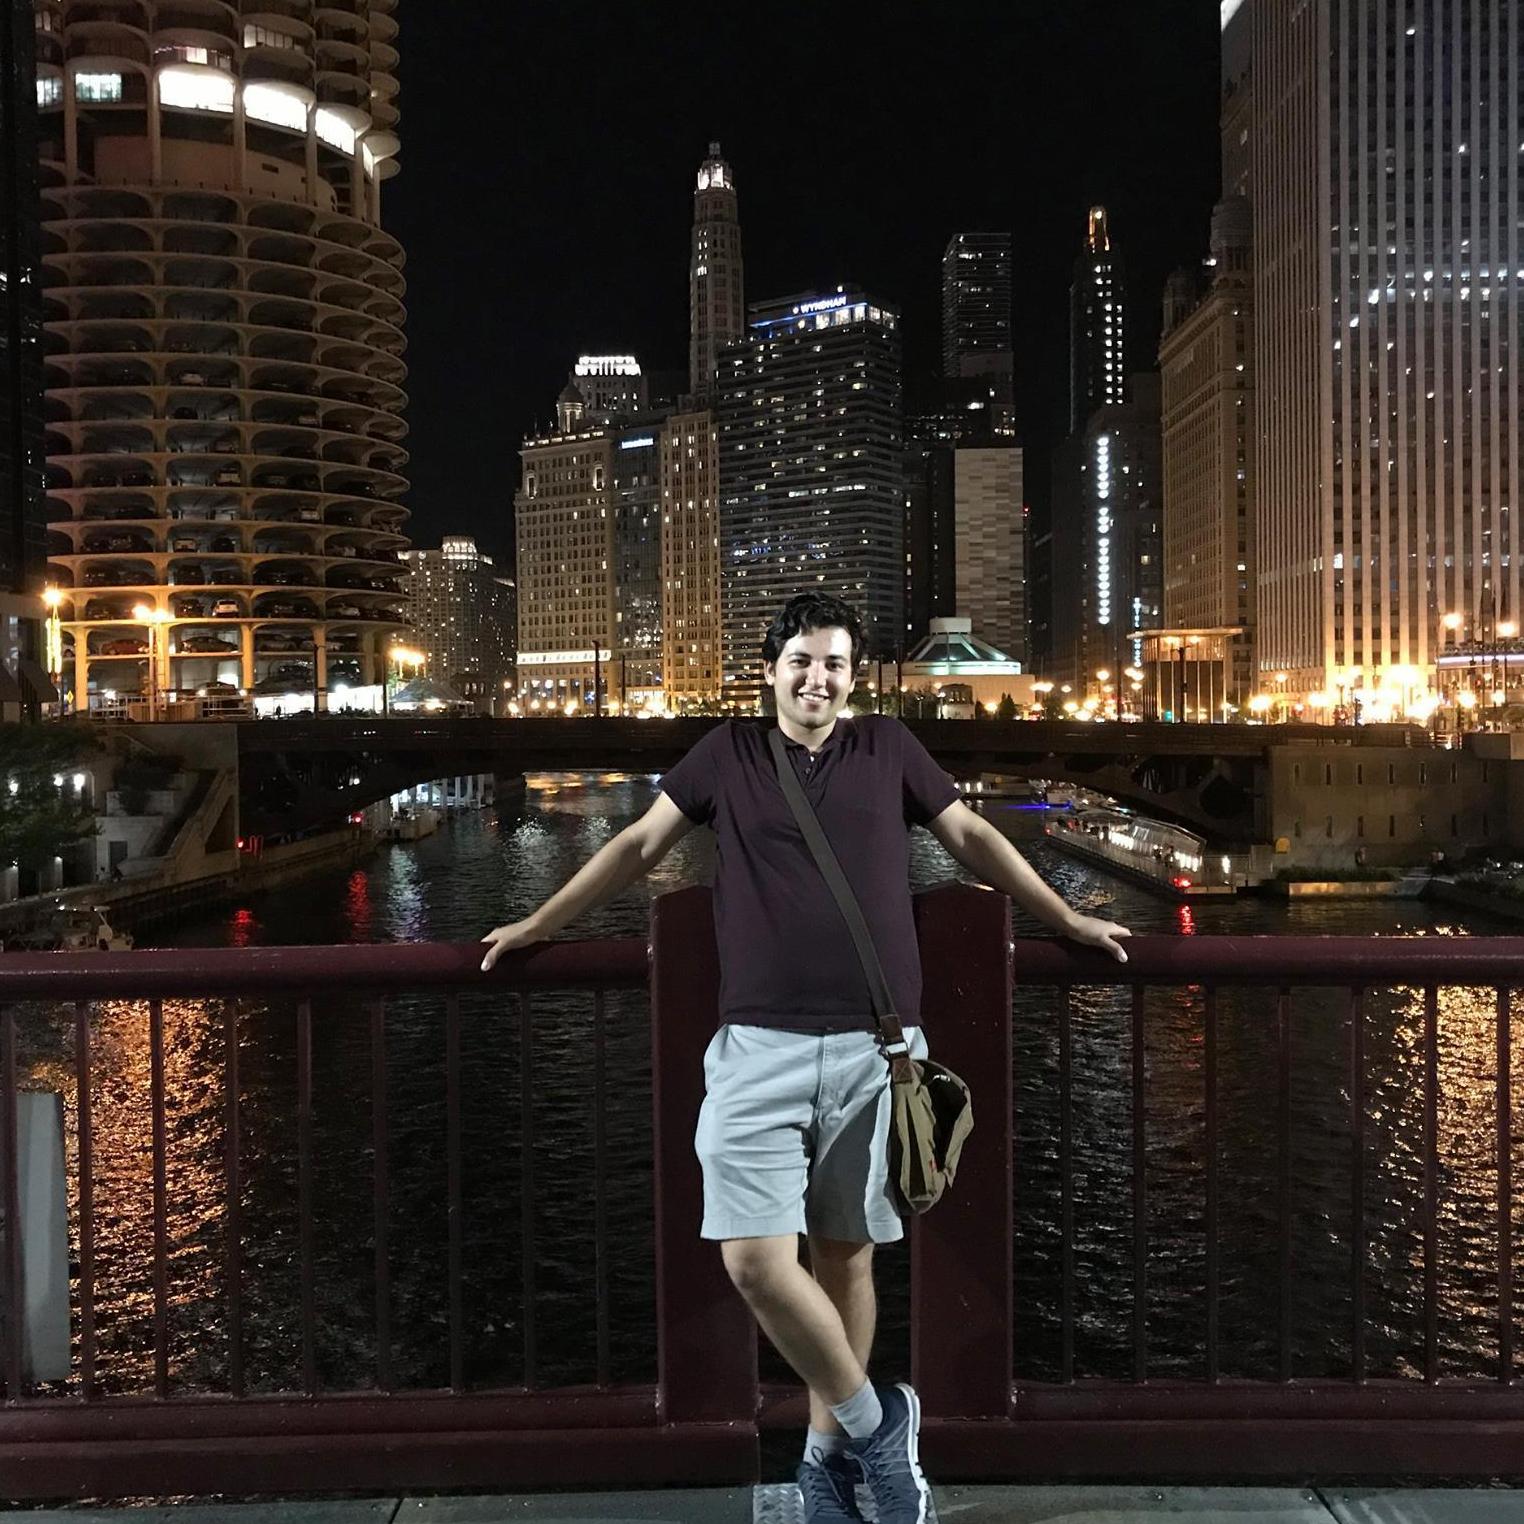 Robert poses on a bridge in Chicago, summer 2017.